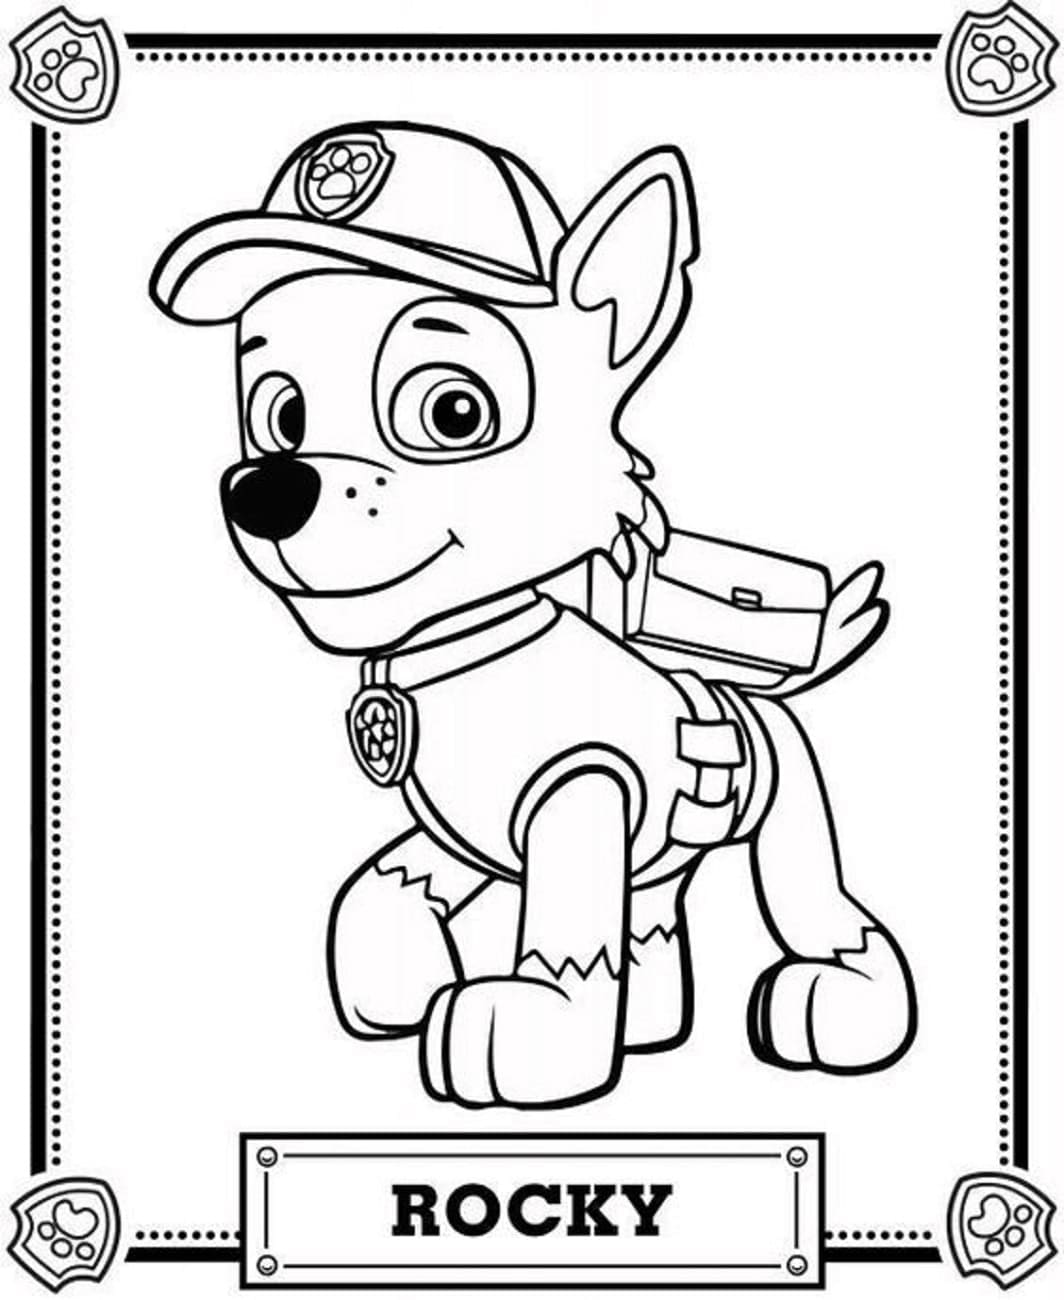 Cute rocky coloring page